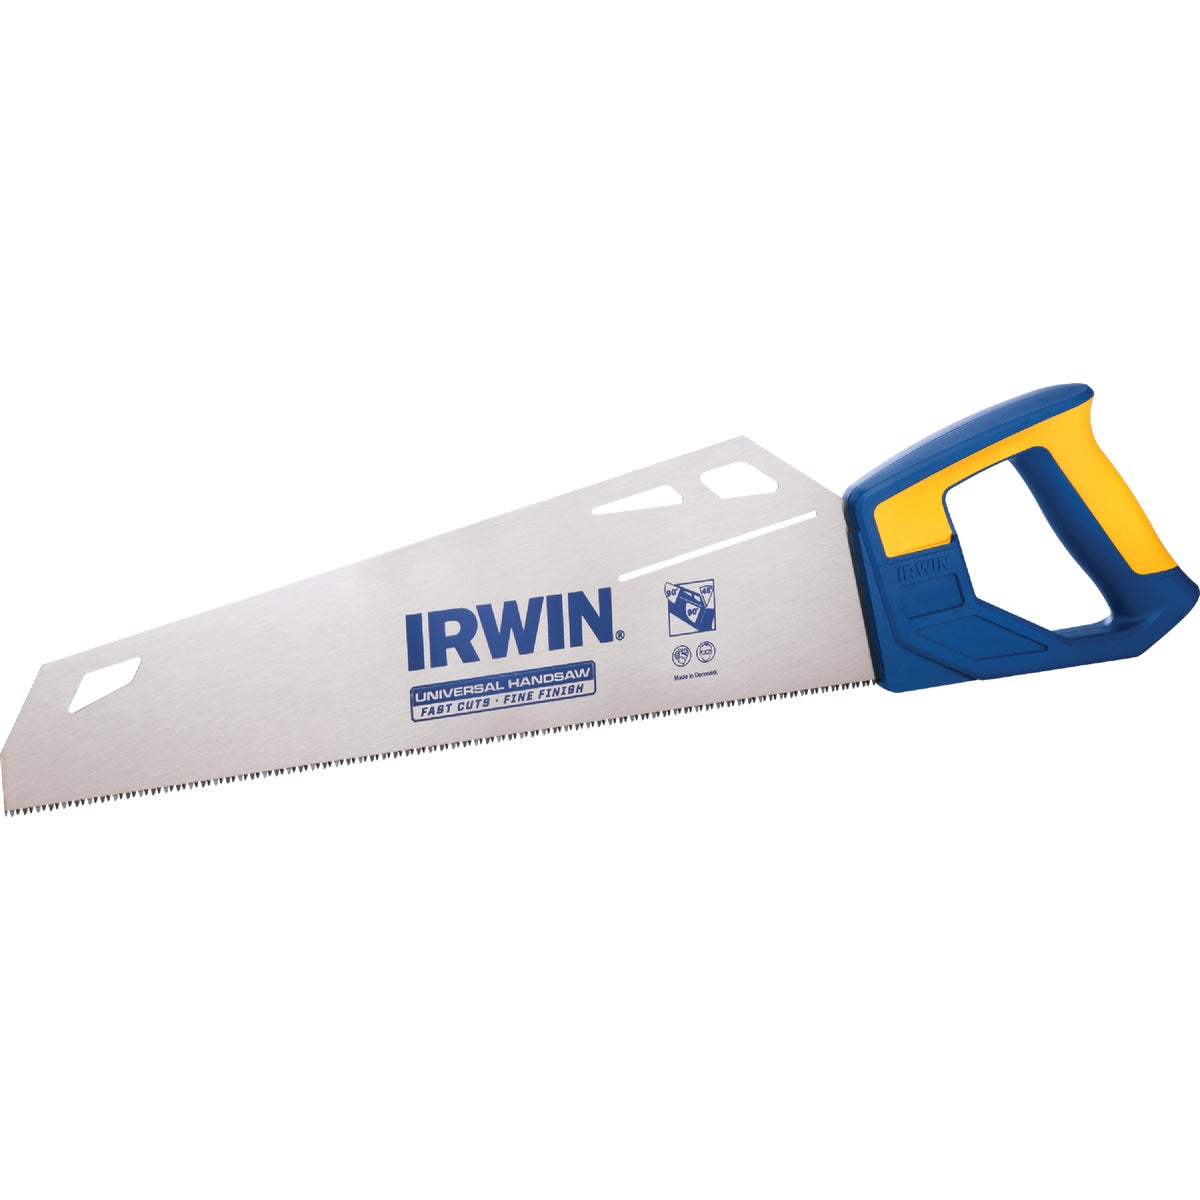 Irwin 15 In. L. Blade 12 PPI High Density Resin Handle Hand Saw